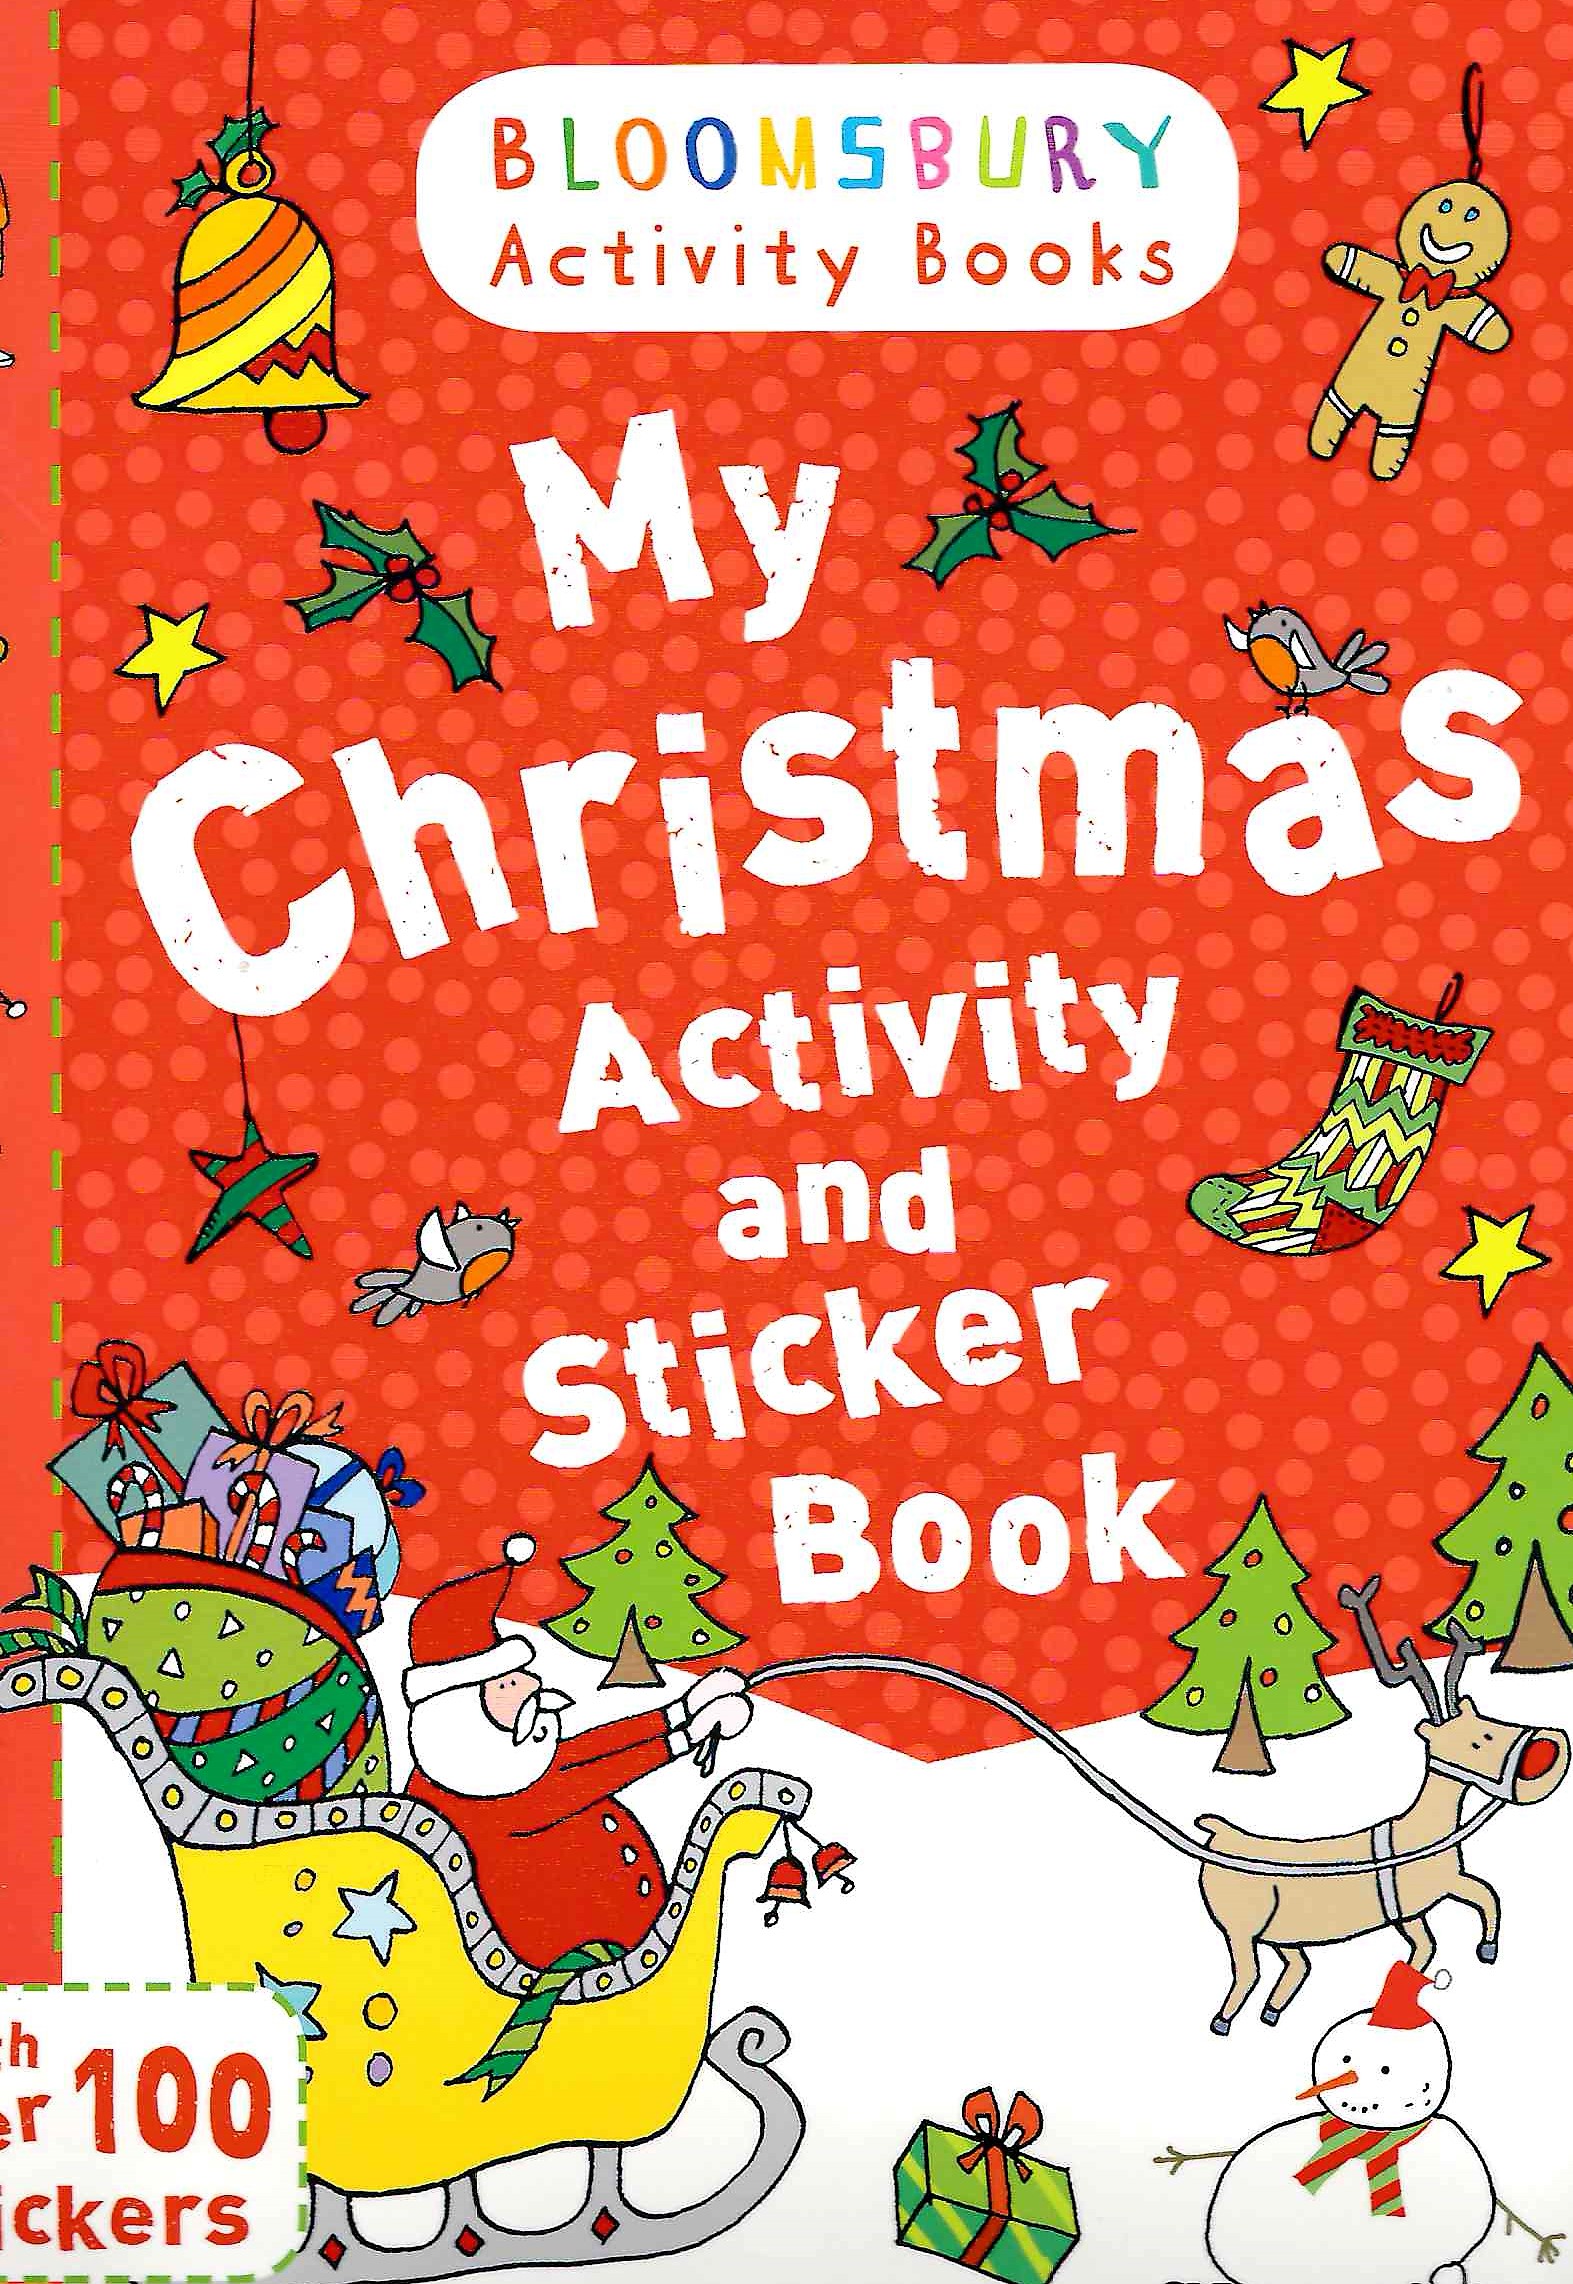 My Christmas Activity and Sticker Book